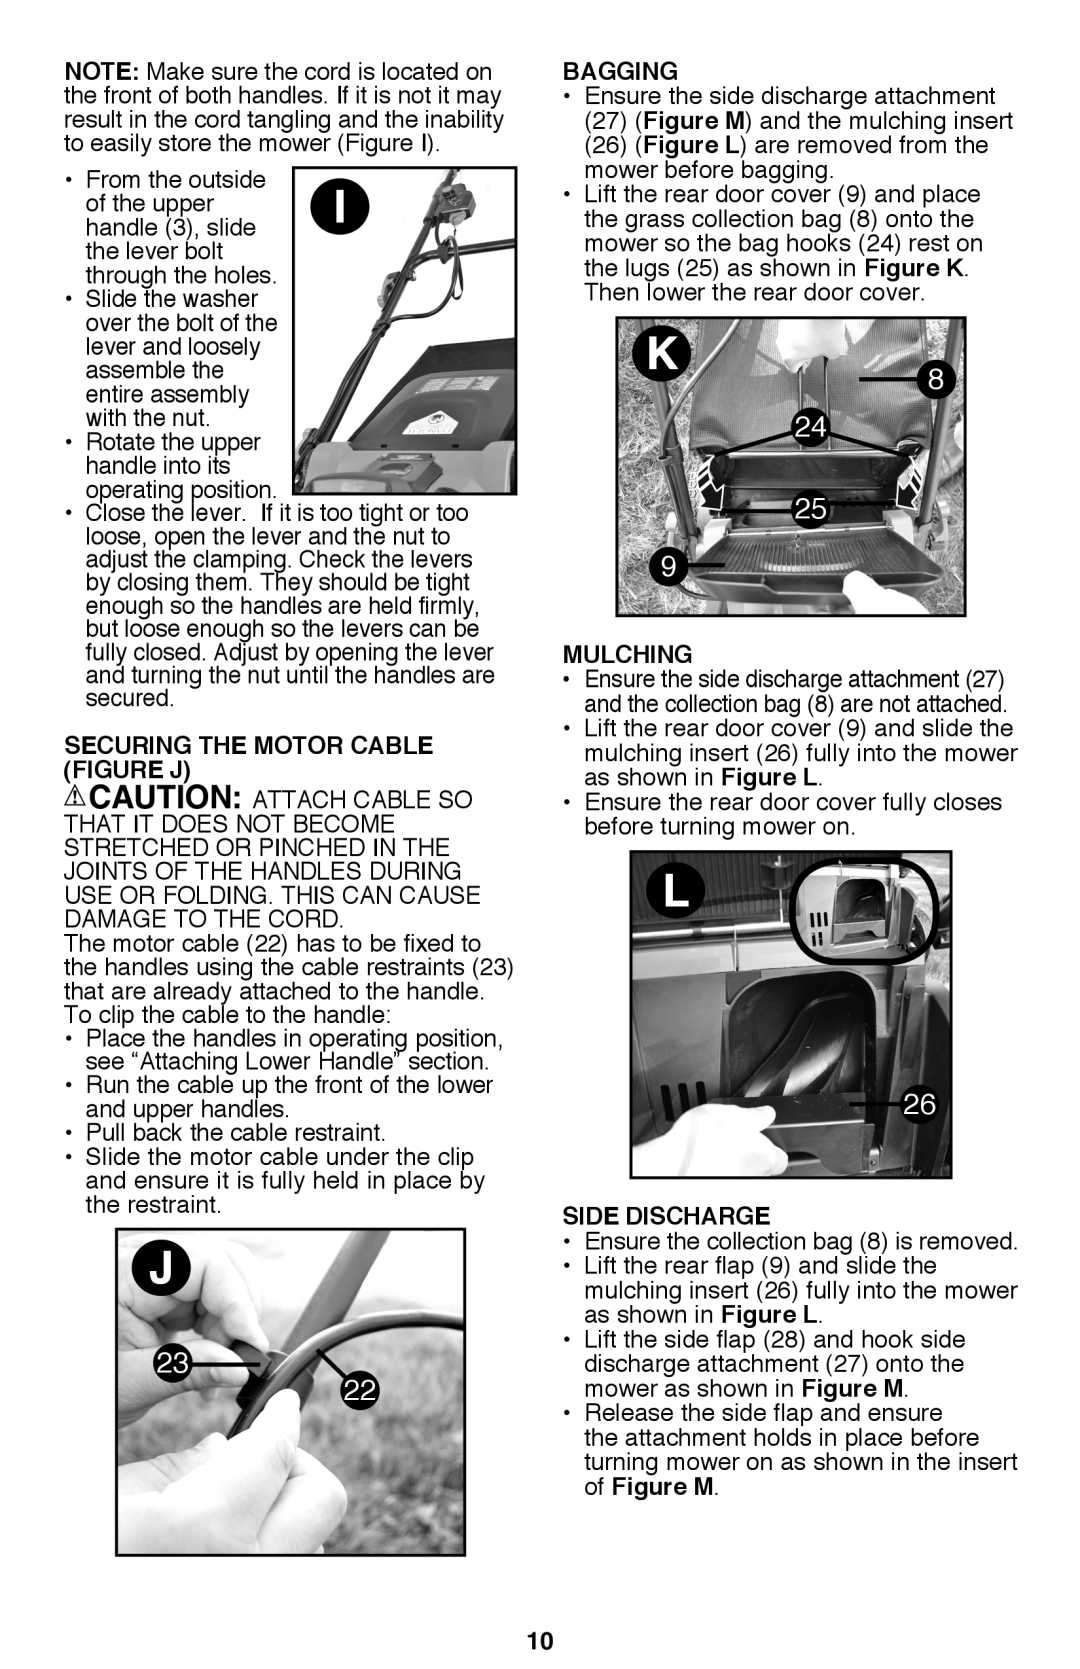 Black & Decker CM2040 instruction manual Securing The Motor Cable Figure J, Bagging, Mulching, Side discharge 